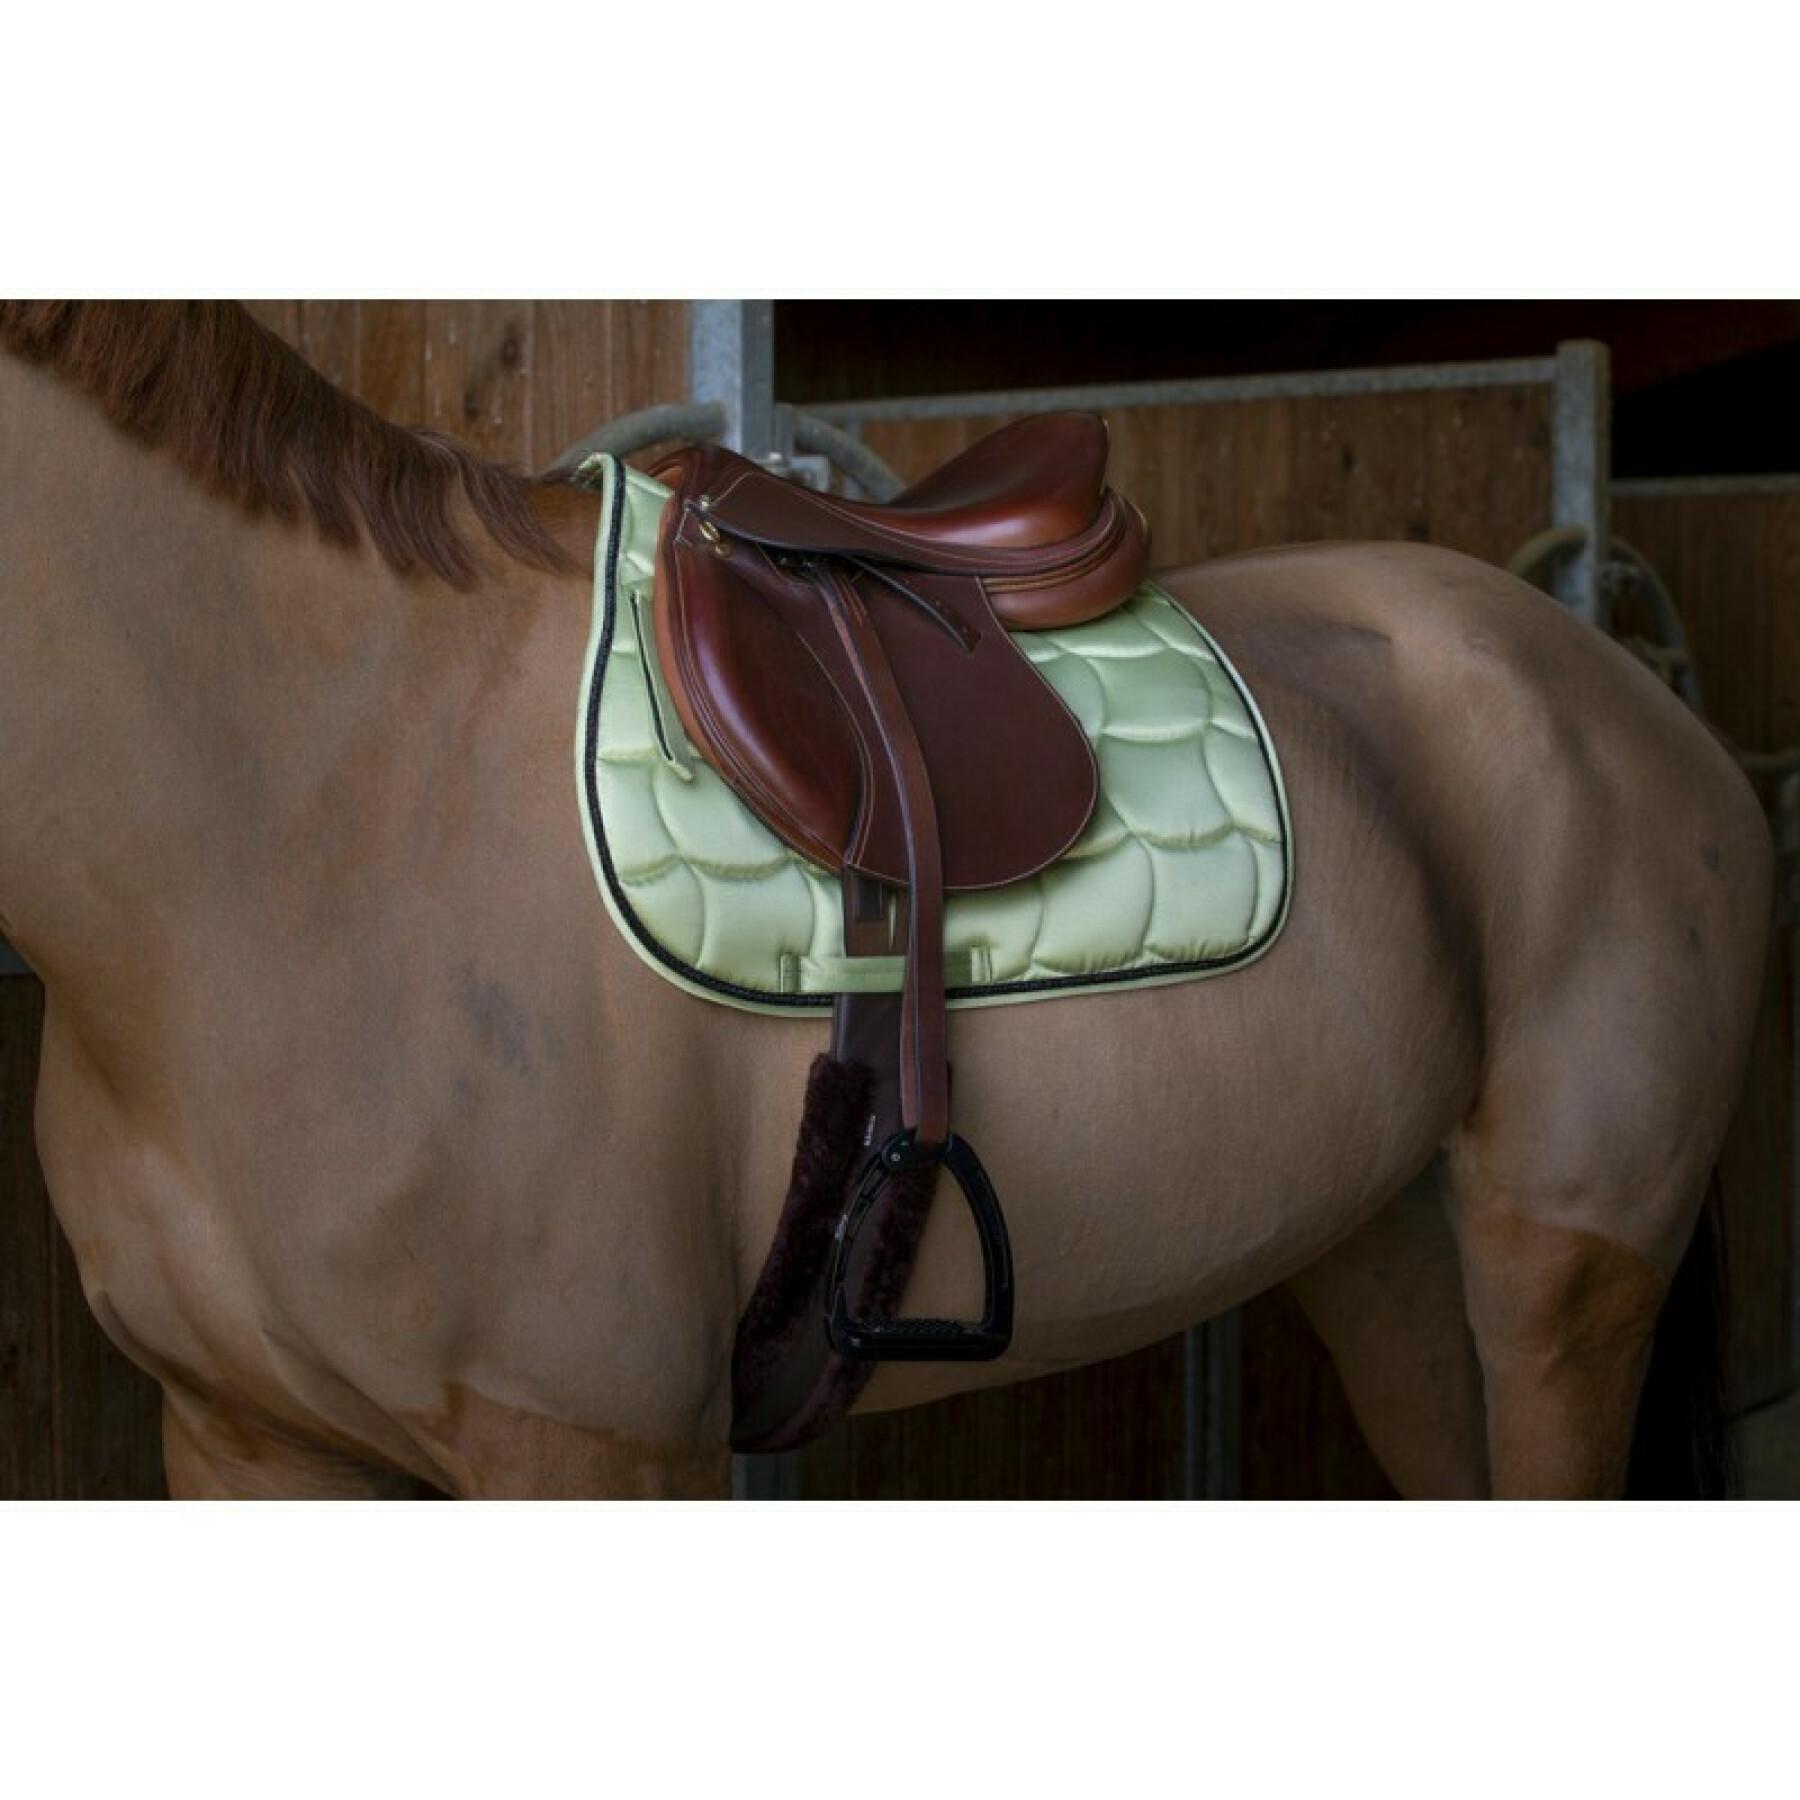 Saddle pad for horses Equithème Satin